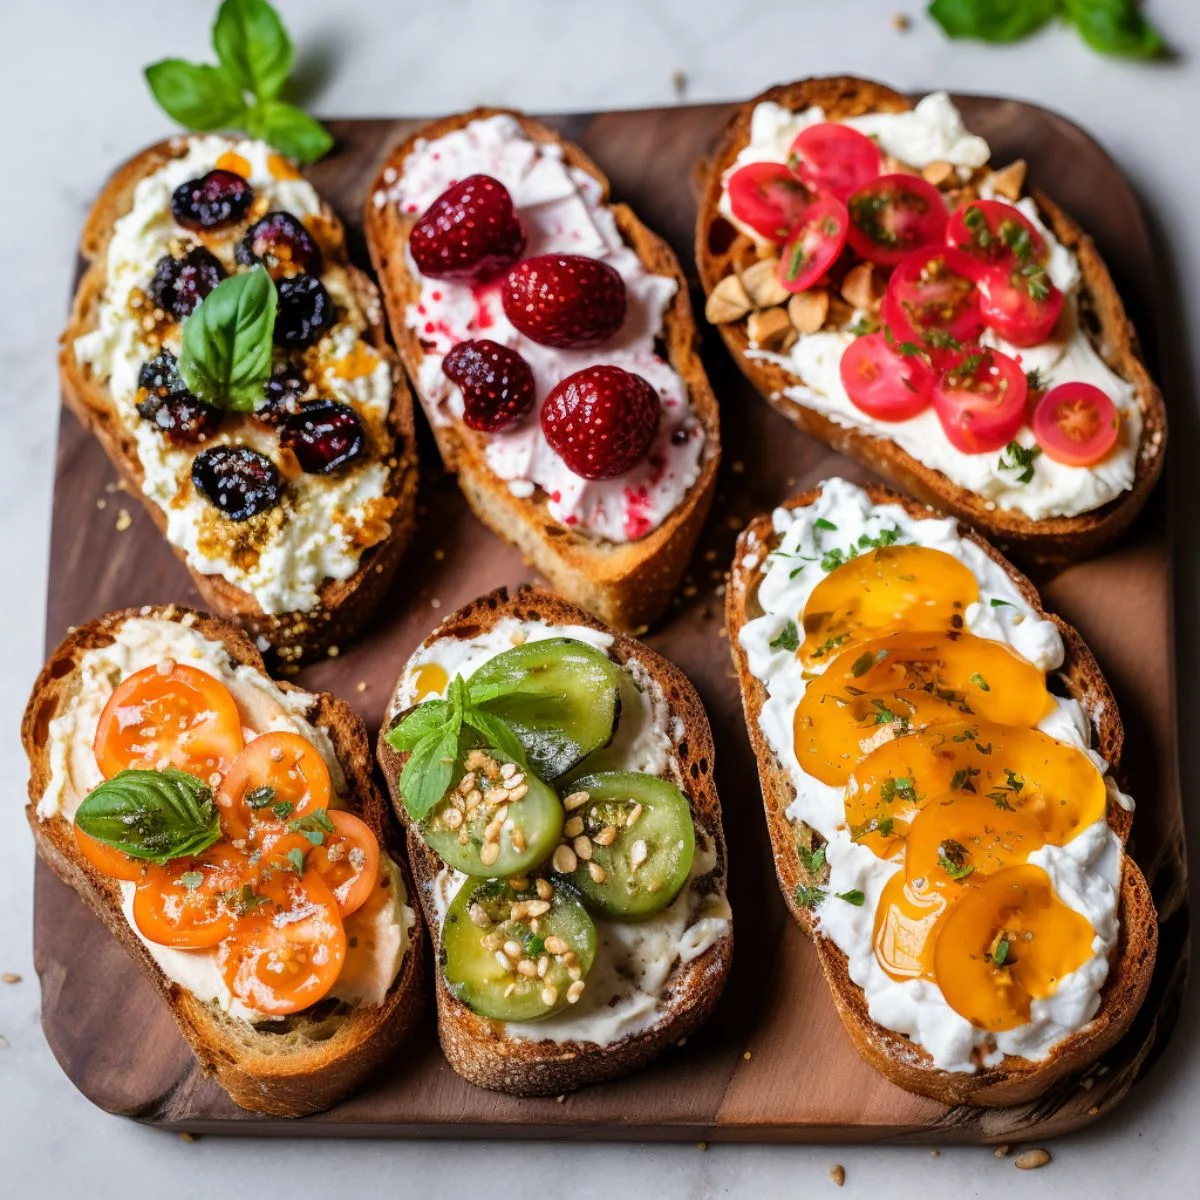 Plate of 6 cottage cheese toasts with different toppings.